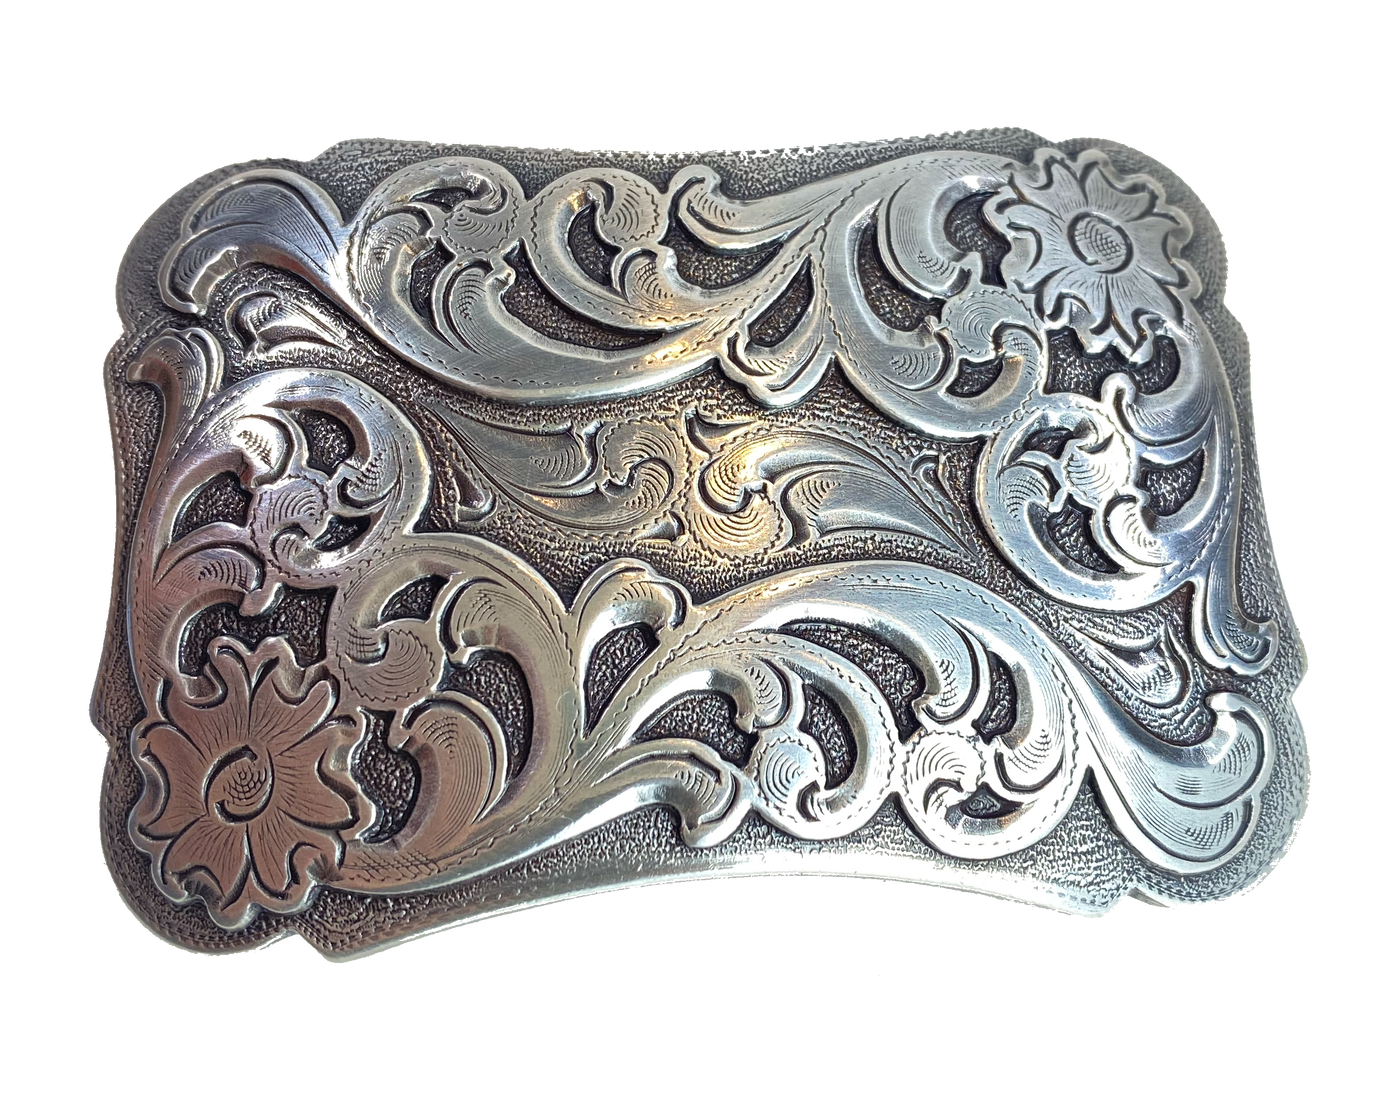 A ornate Classic Western scroll design in Antique Nickle that looks great on plain 1 1/2" Black or Brown belt. A easy to wear rectangle shape that's not too big. Not to cowboy or cowgirl just enough of the west. Imported